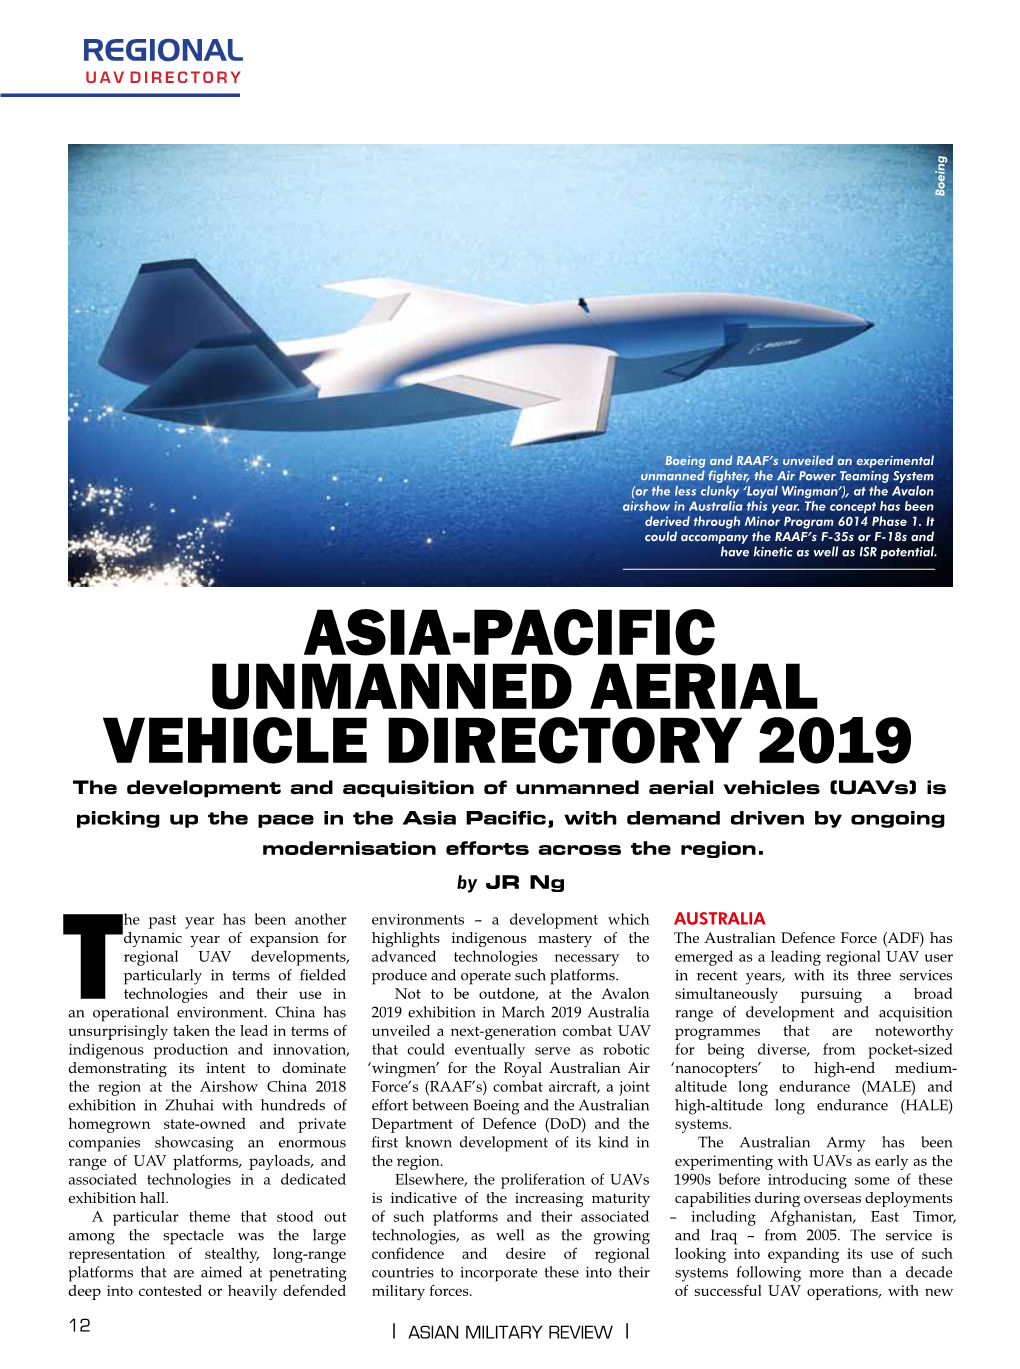 Asia-Pacific Unmanned Aerial Vehicle Directory 2019